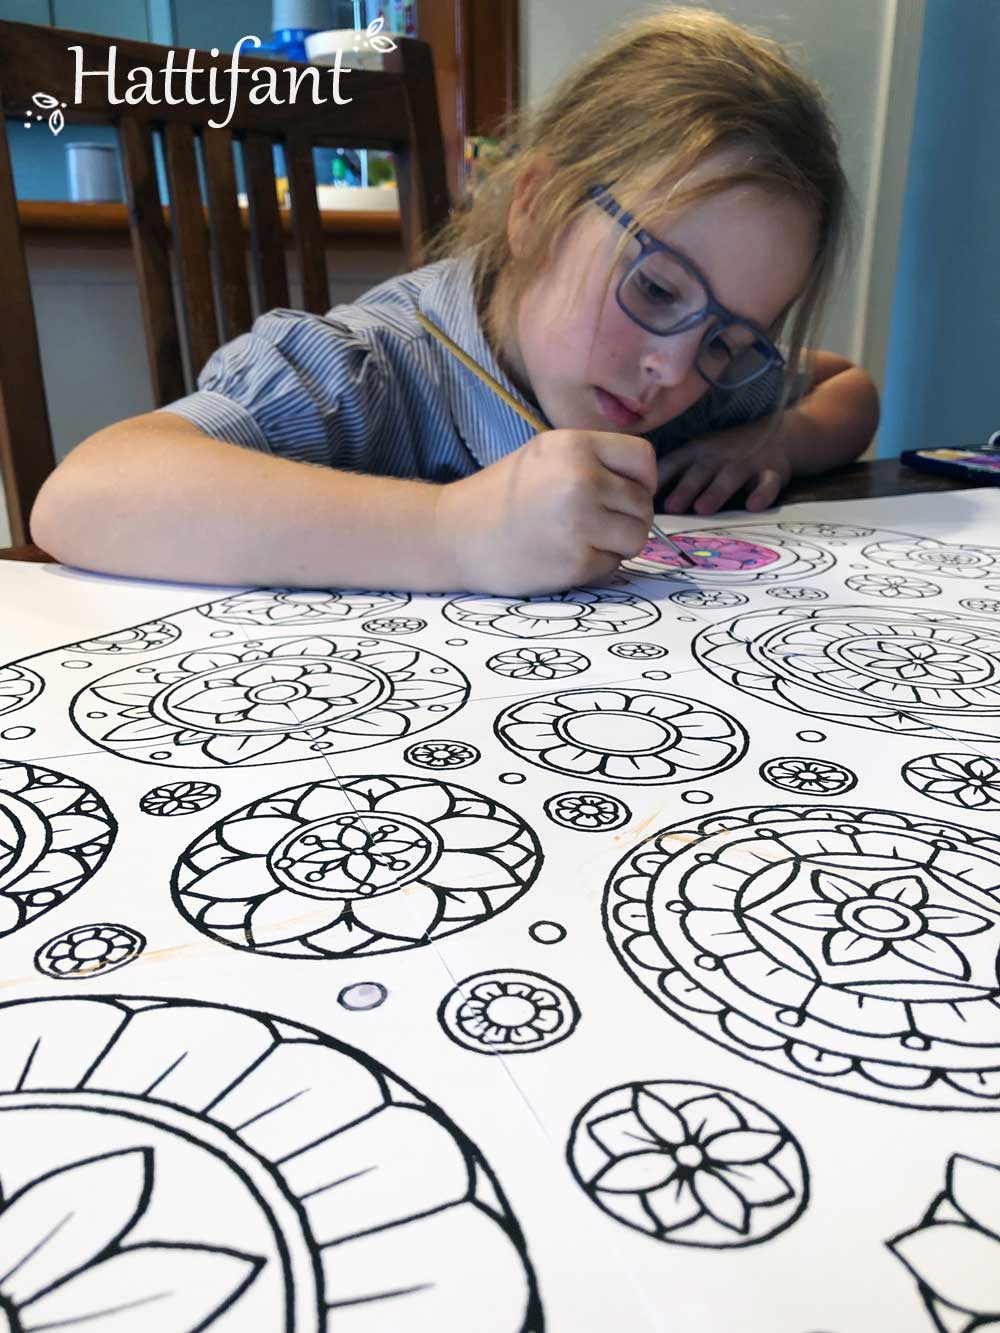 Hattifant's Giant Mandala Christmas Tree Poster to Color In Process